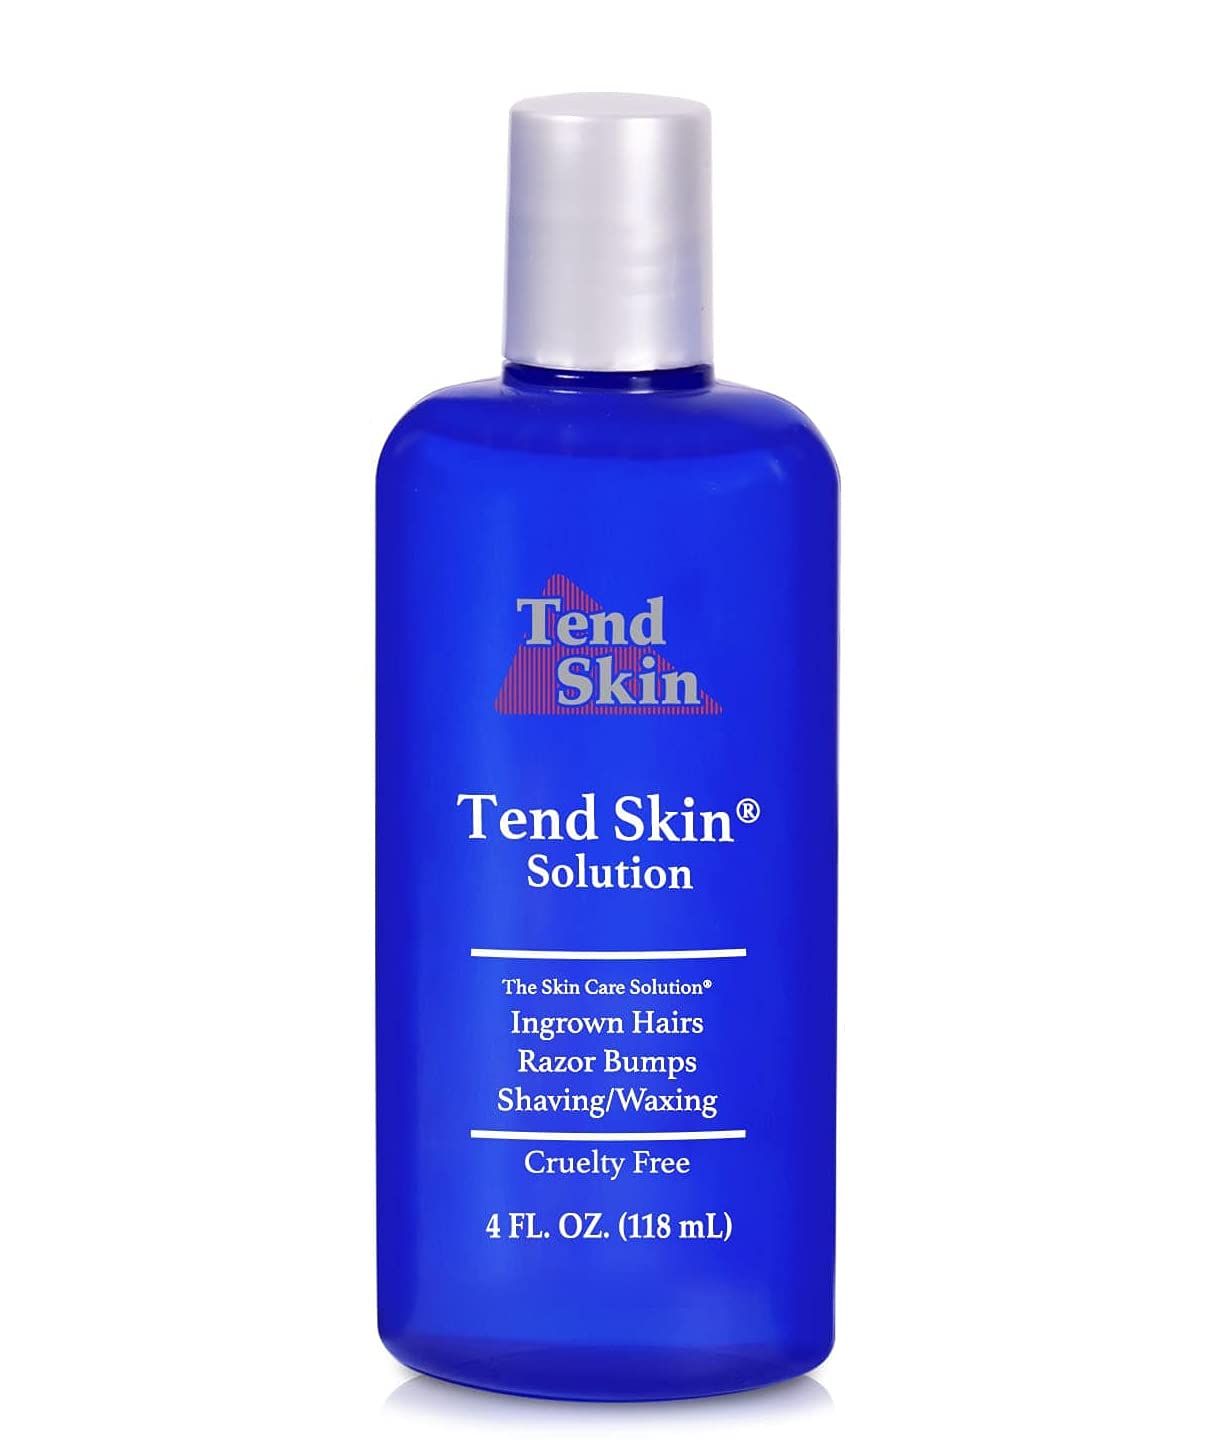 Tend Skin Solution ingredients (Explained)